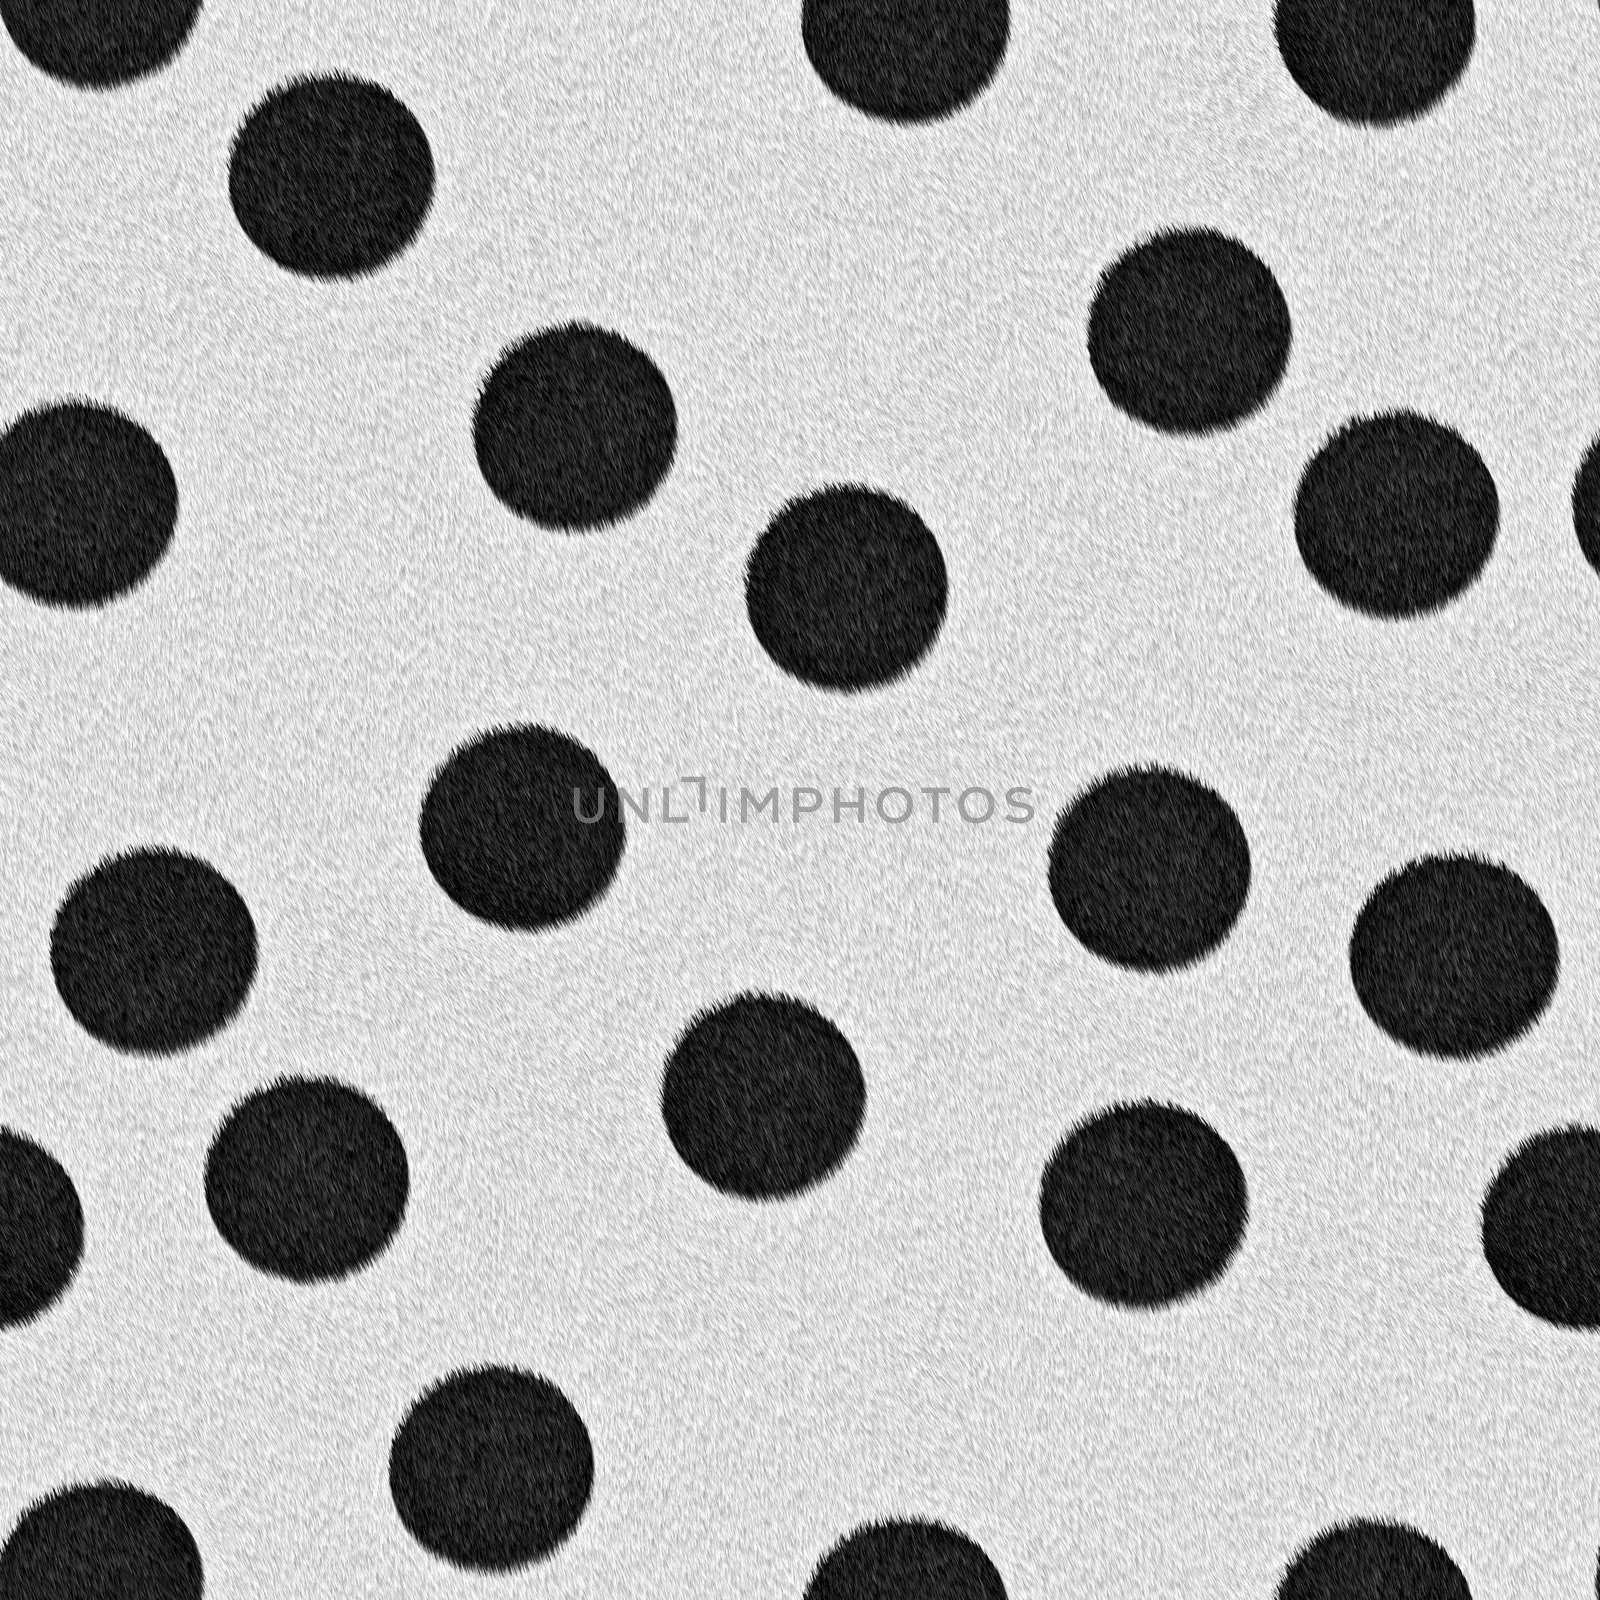 a very large illustration of rendered black and white dalmation spots